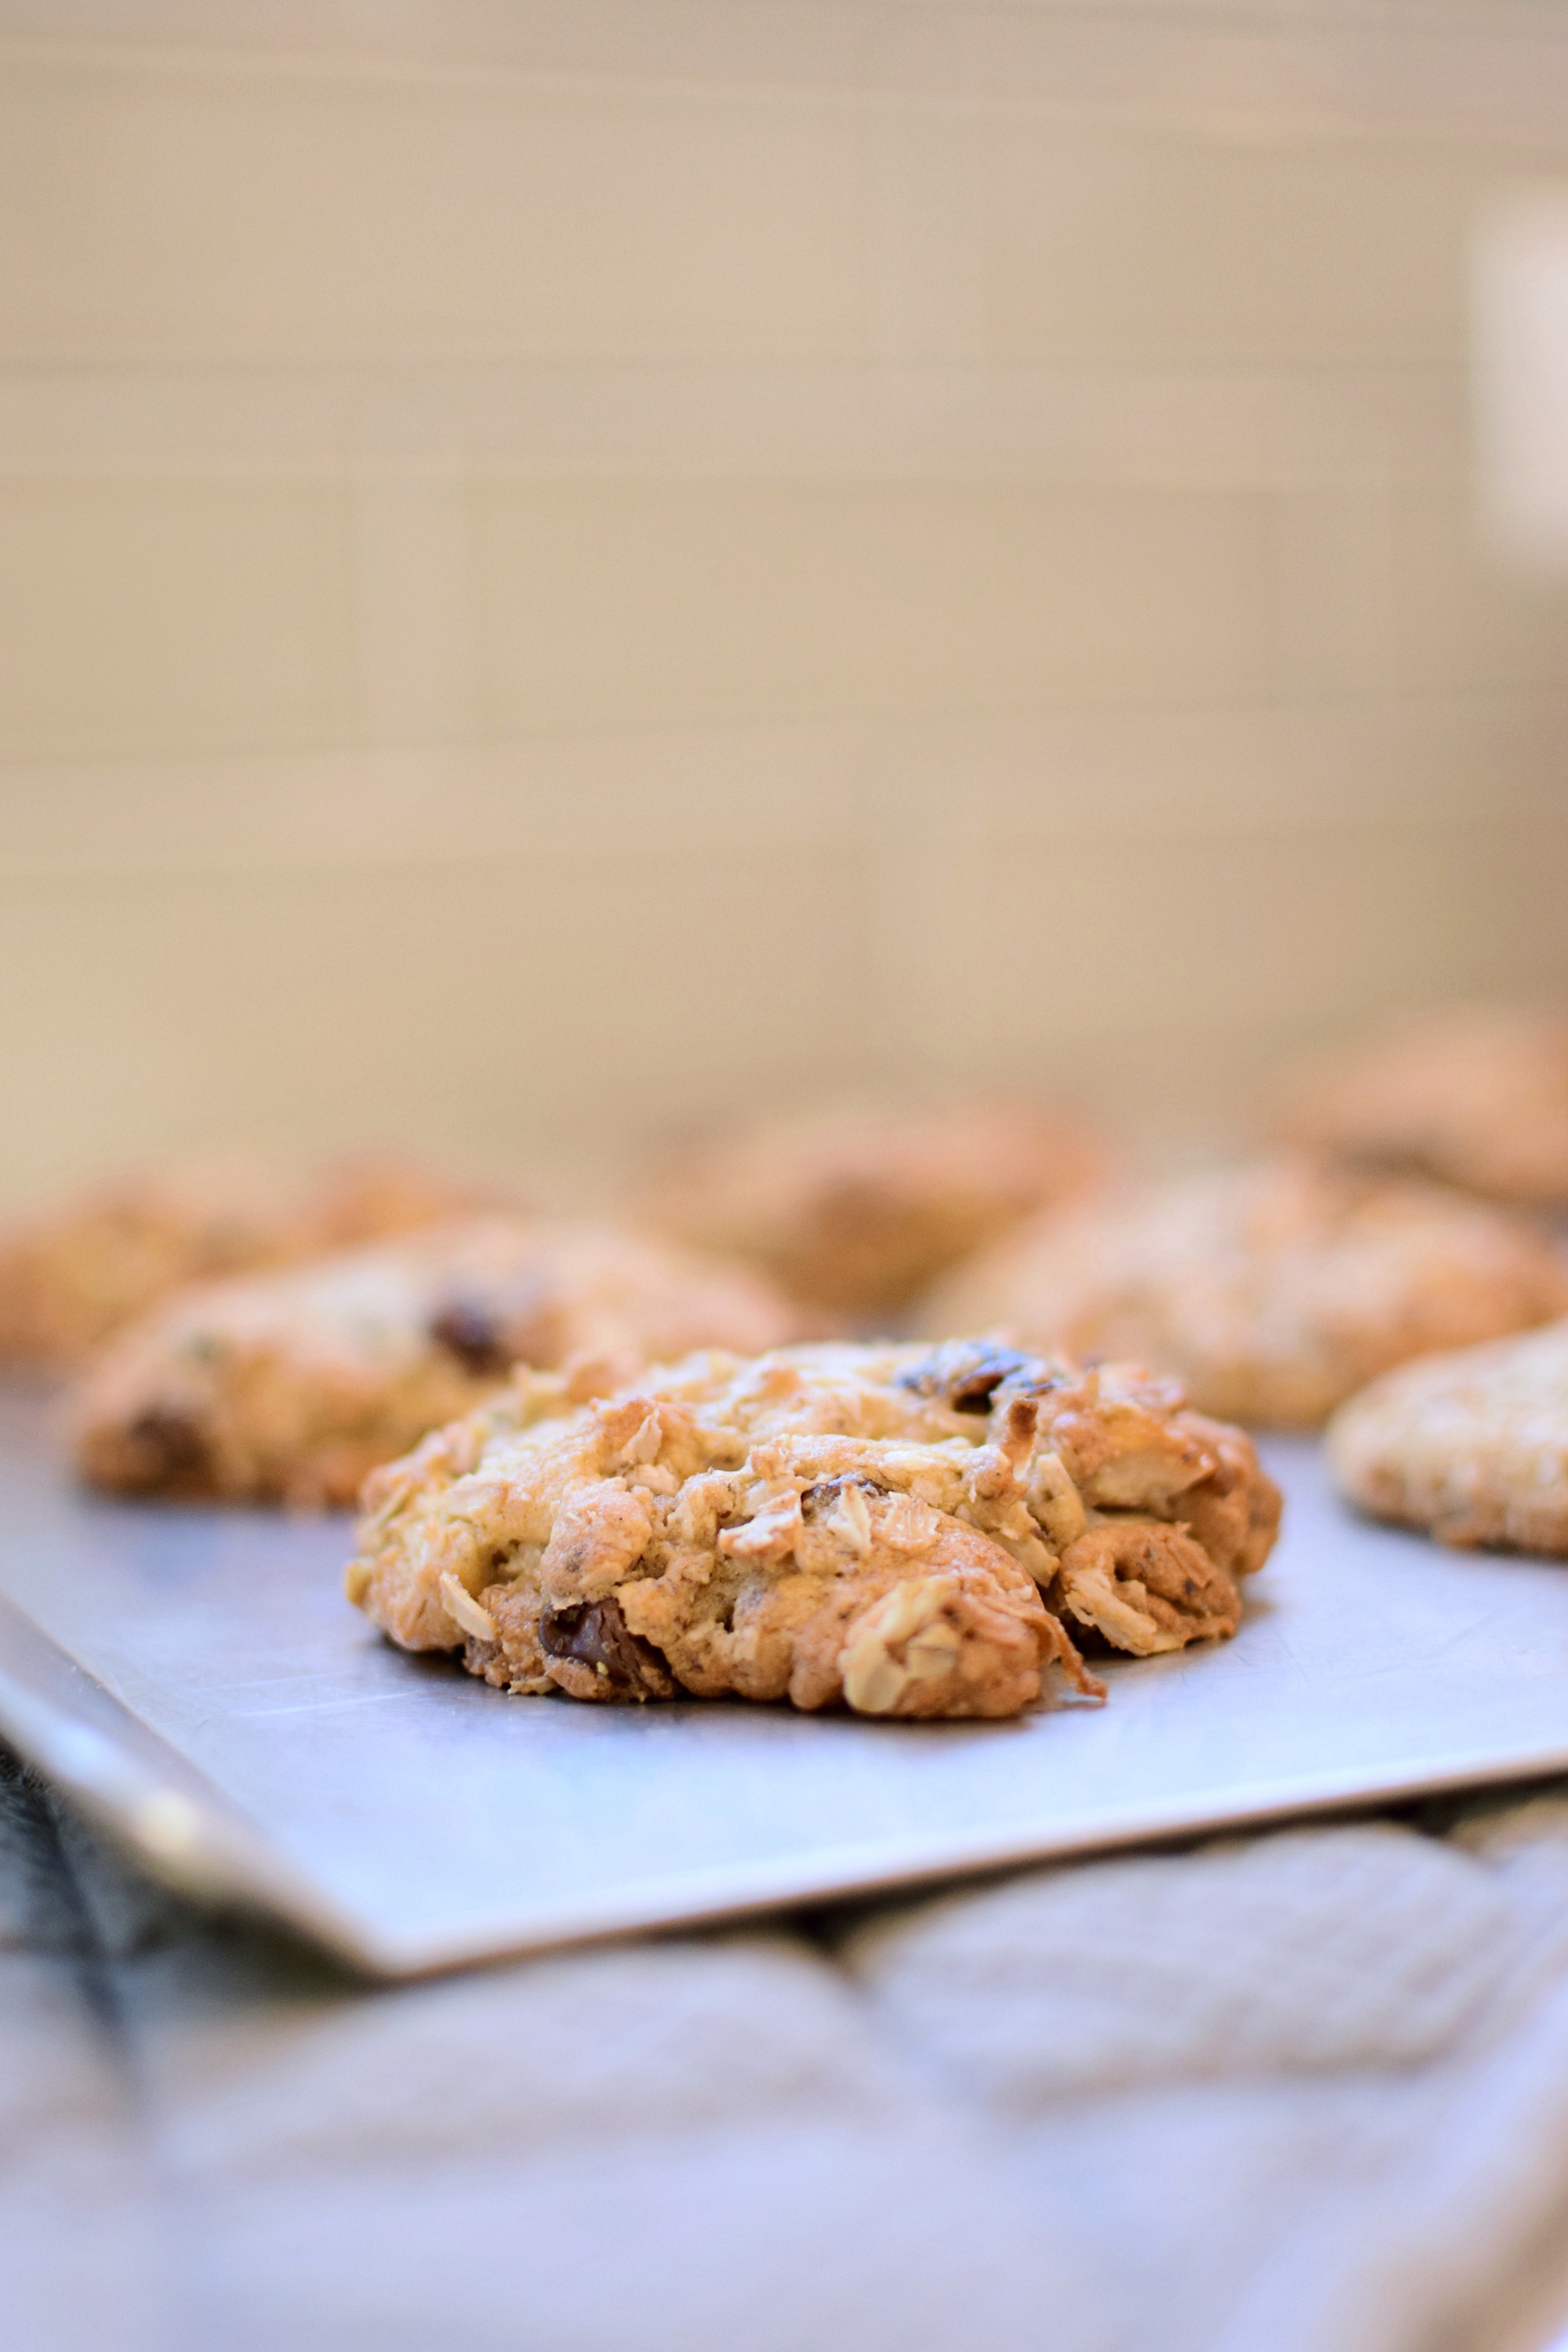 A jumbo loaded oatmeal lactation cookie make with a simple lactation recipe including oatmeal, nuts, flaxseed, brewers yeast, chocolate chips, shredded coconut, and more